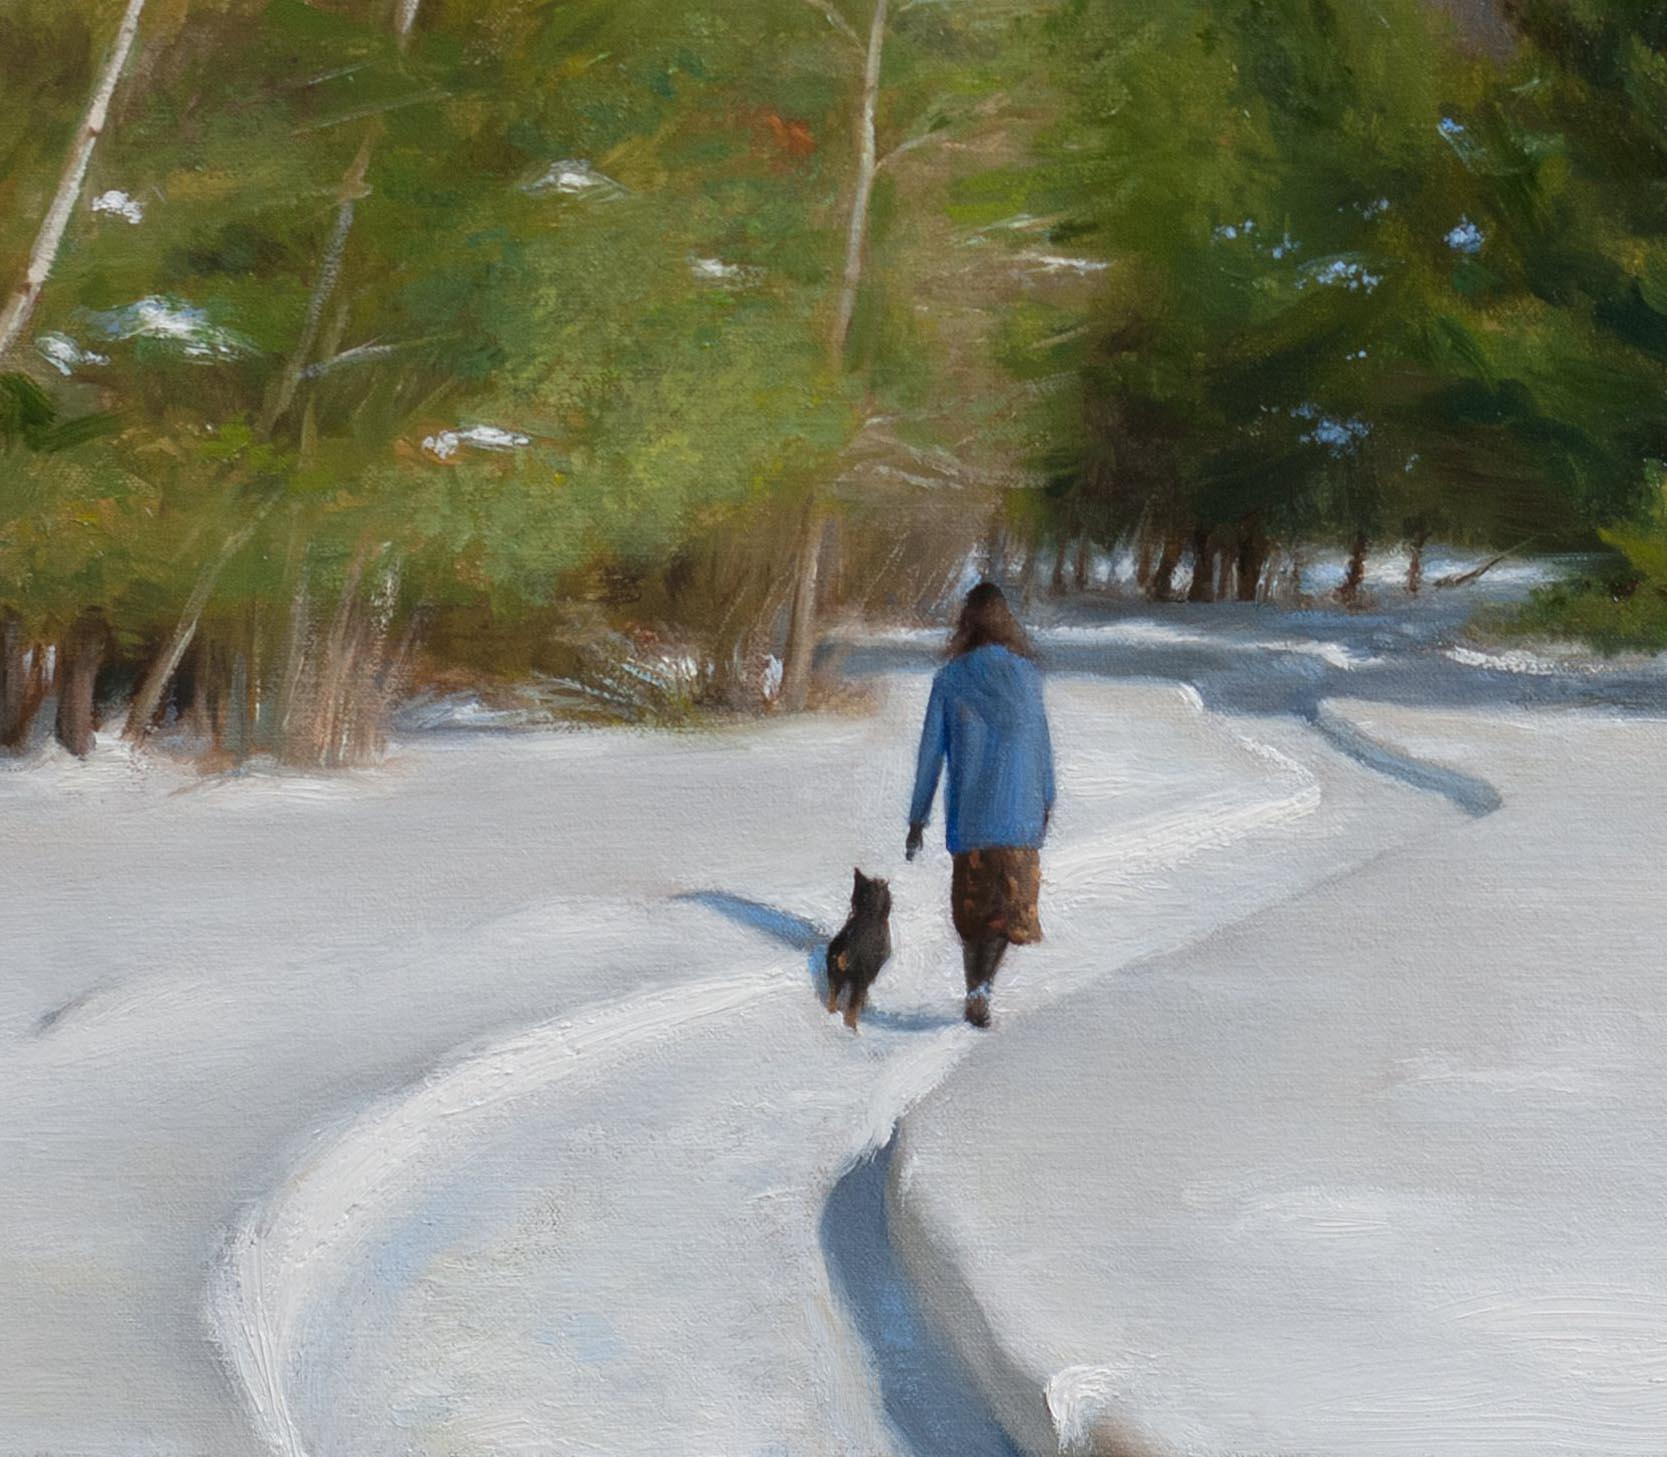 A woman walks down a plowed path with her dog in Daily's painting 'Into the Woods'. Bright pine trees with hints of snow on their branches are a colorful balance to this beautiful painting. Daily combines realism with the effortless sweep of